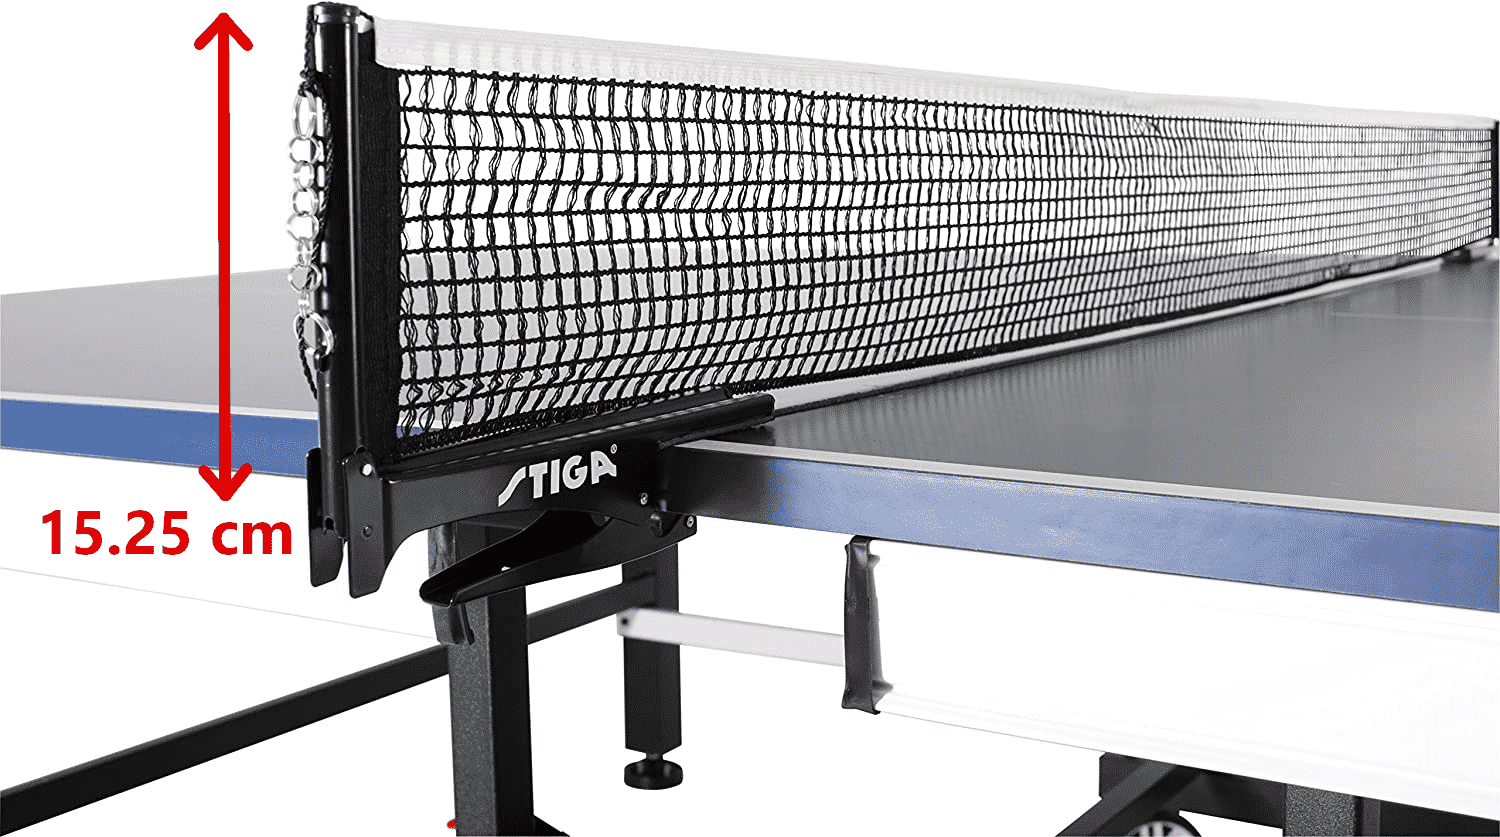 ping pong table dimensions net